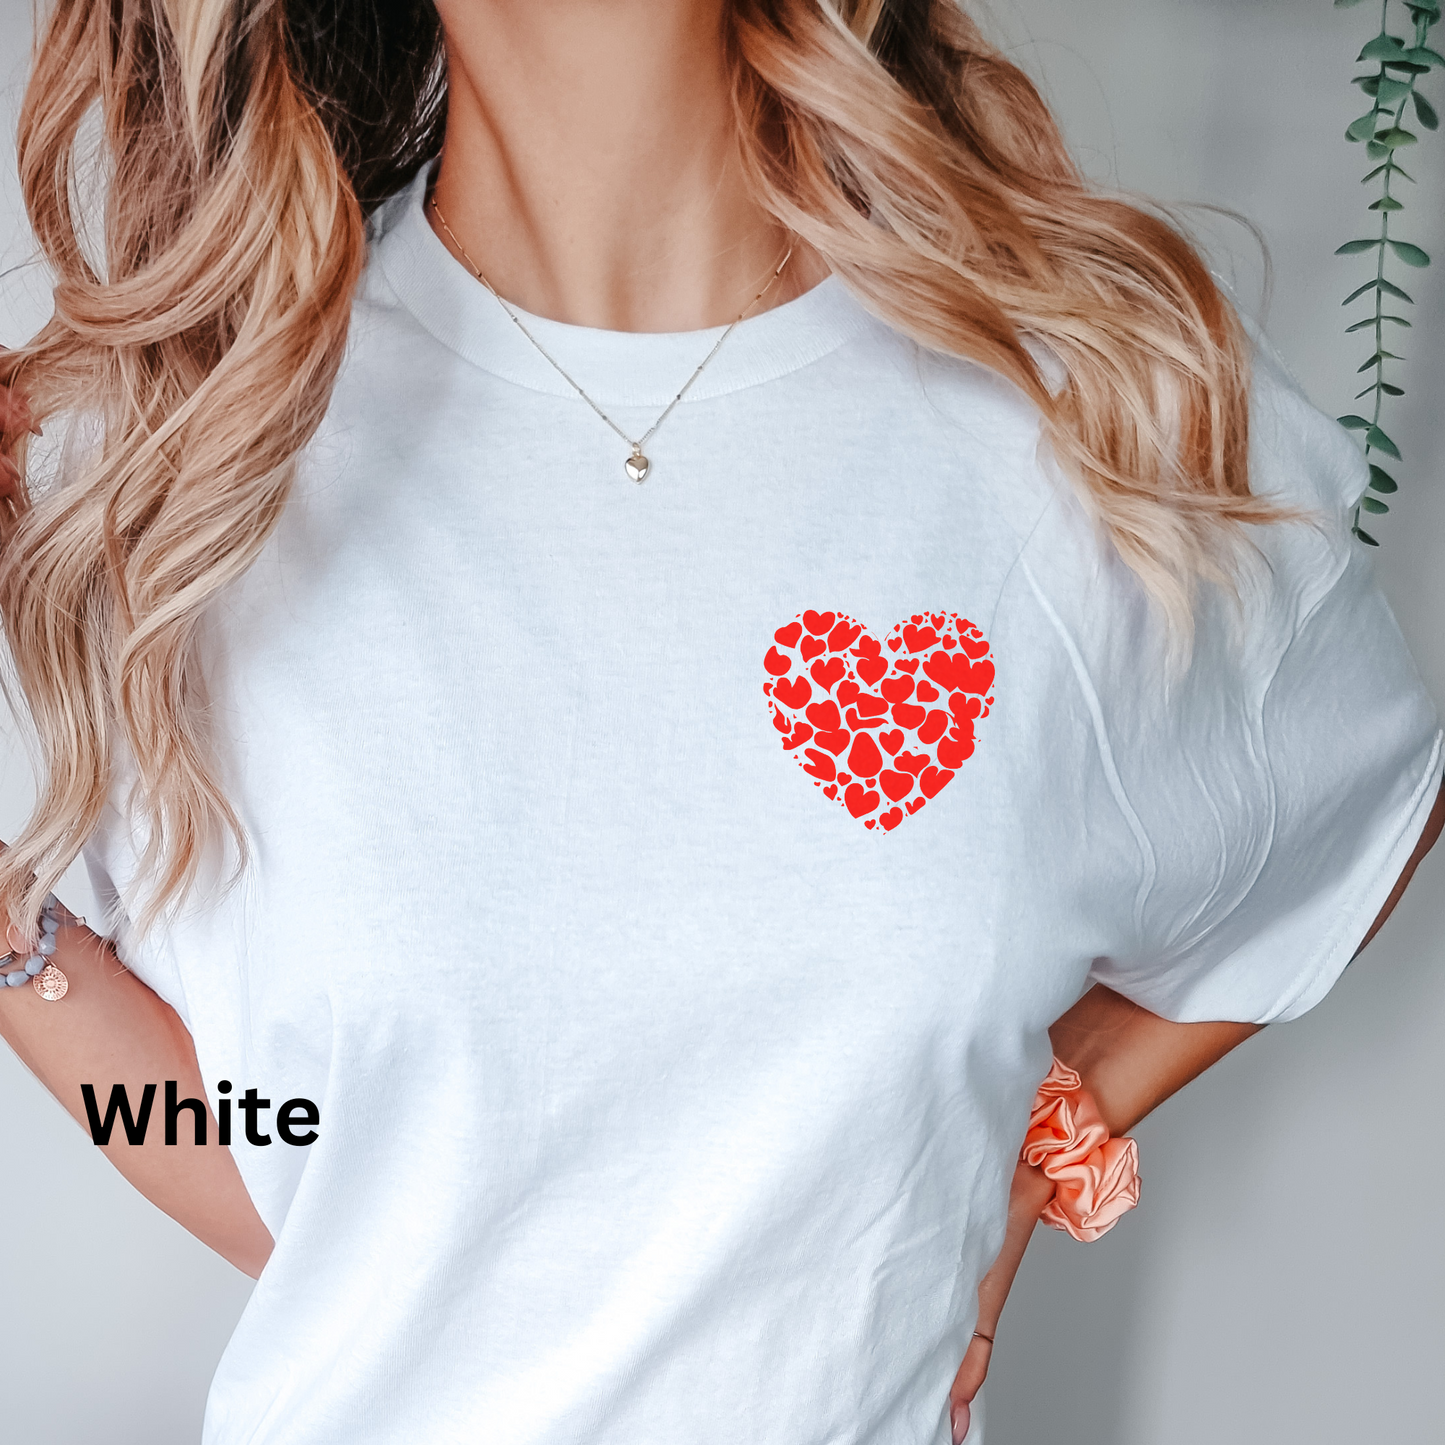 a woman wearing a white shirt with a red heart on it